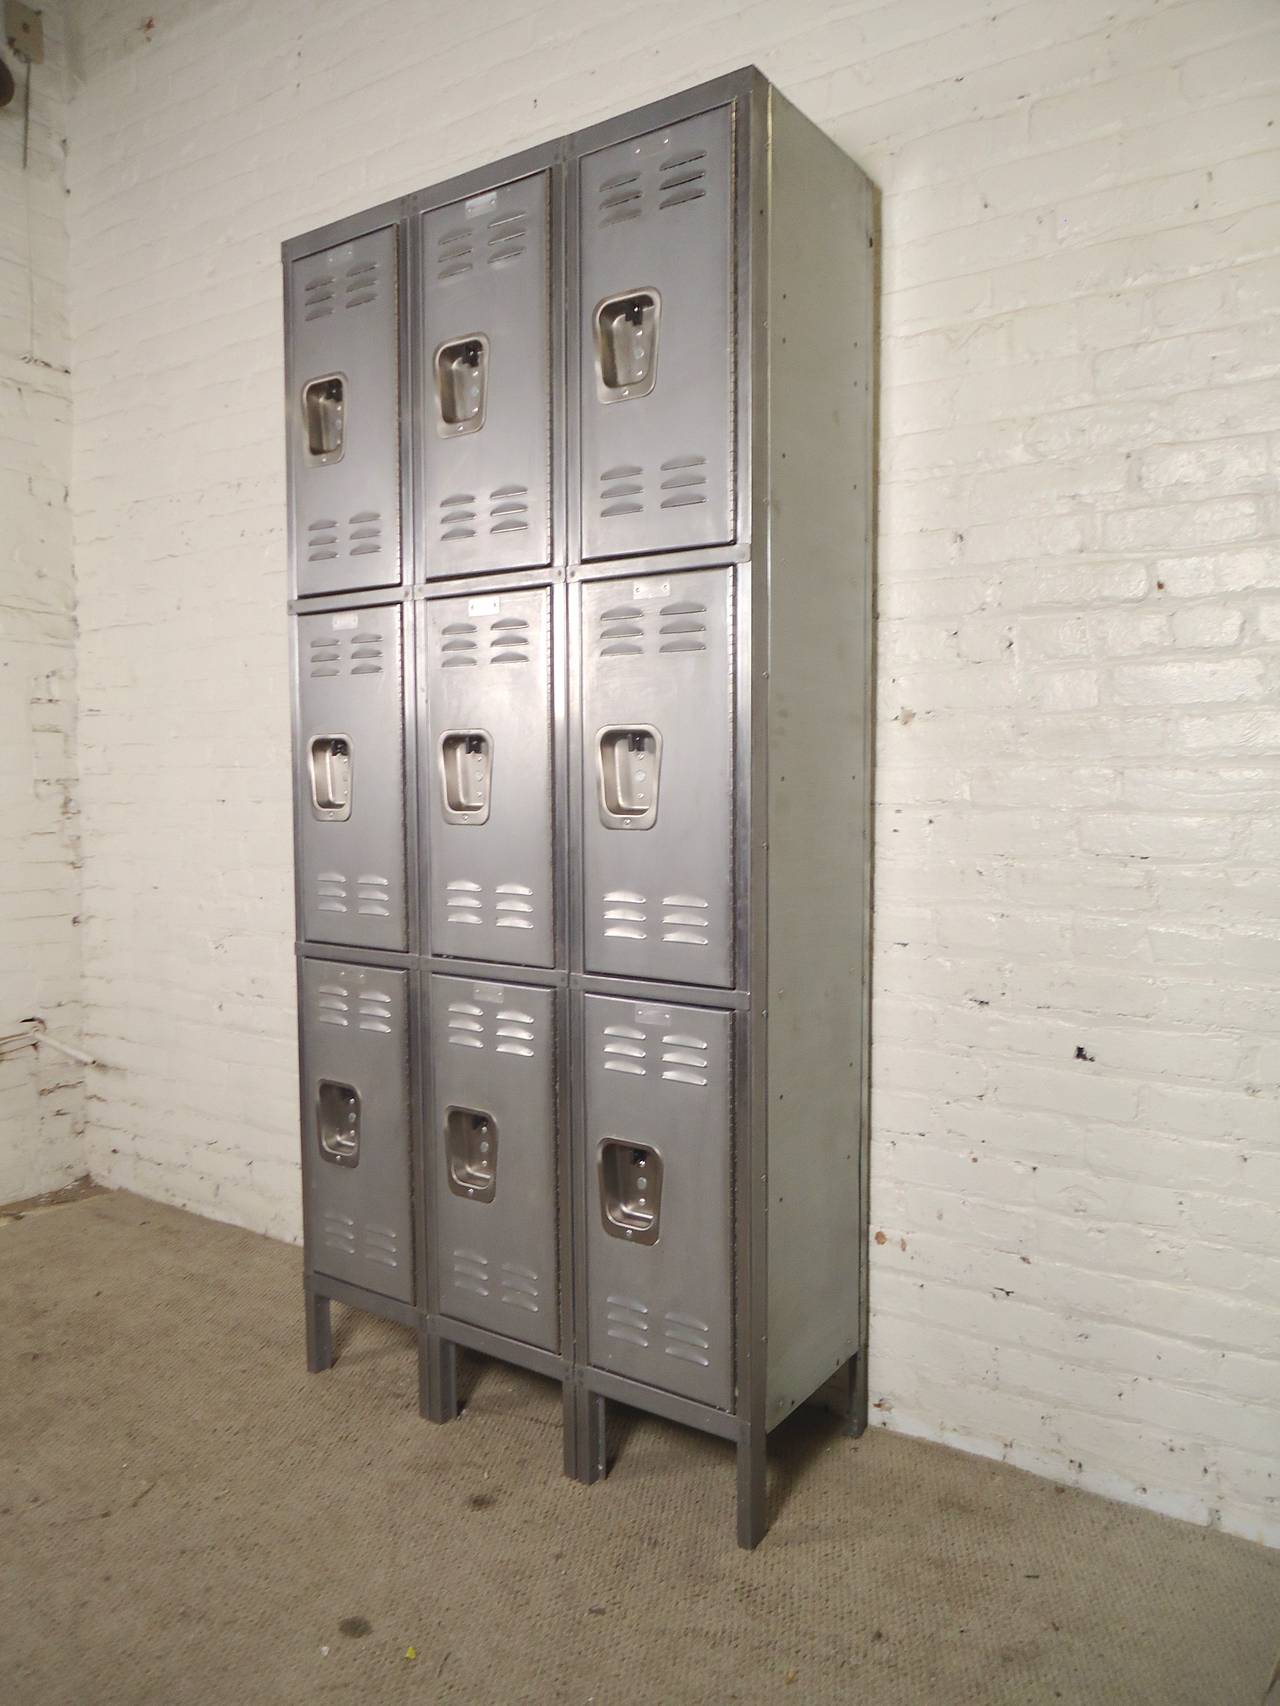 Industrial style metal locker unit with nine compartments. Each locker has vents and coat hangers. Great storage for kitchen or entry way in your modern home.
Inside: 12